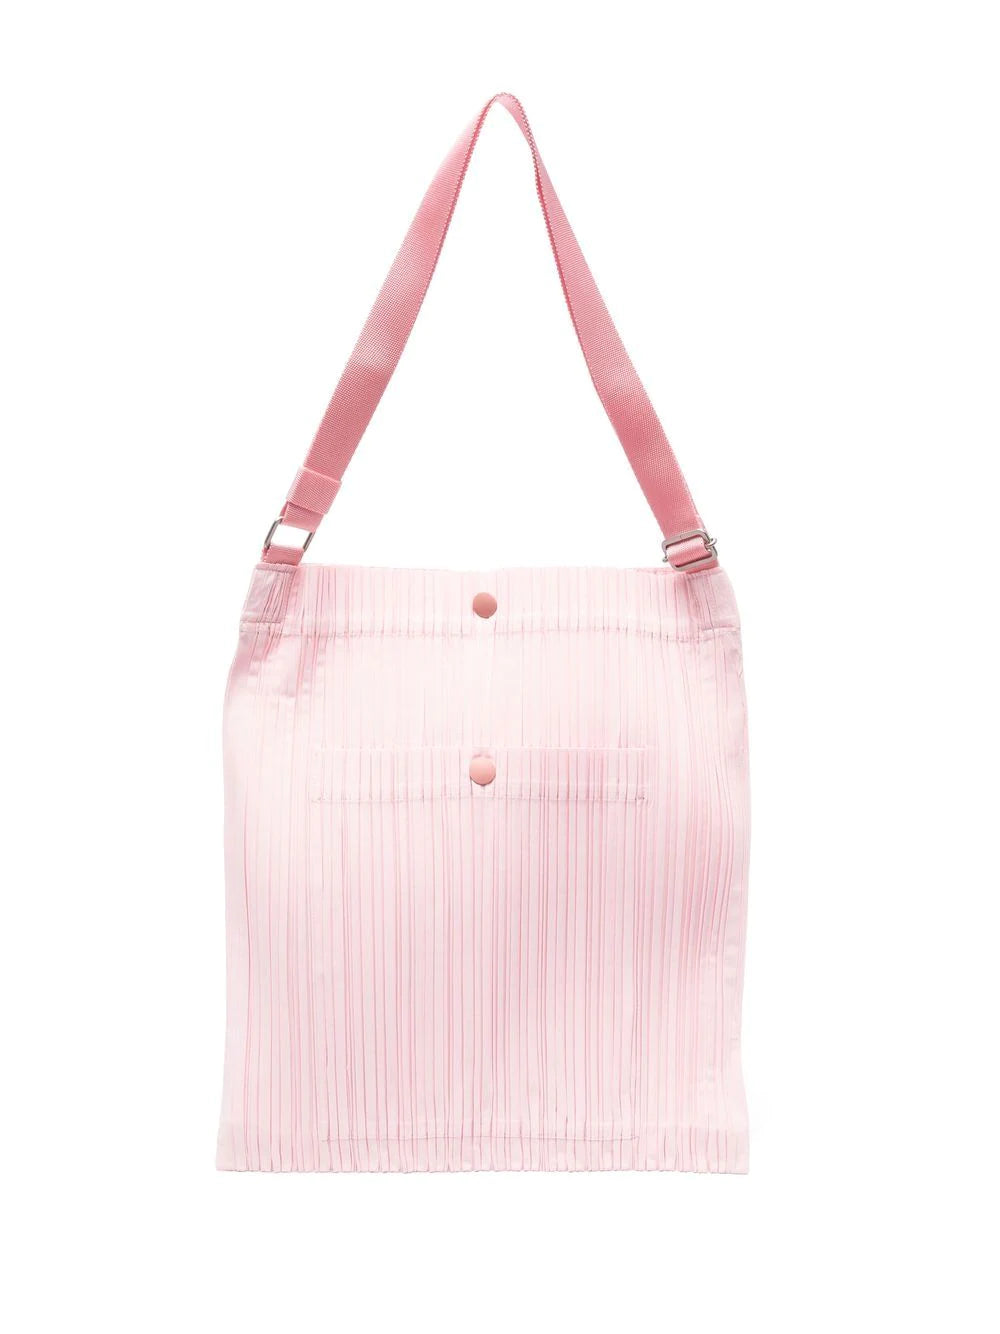 How to Buy Bao Bao Bags and Pleats Please in Japan